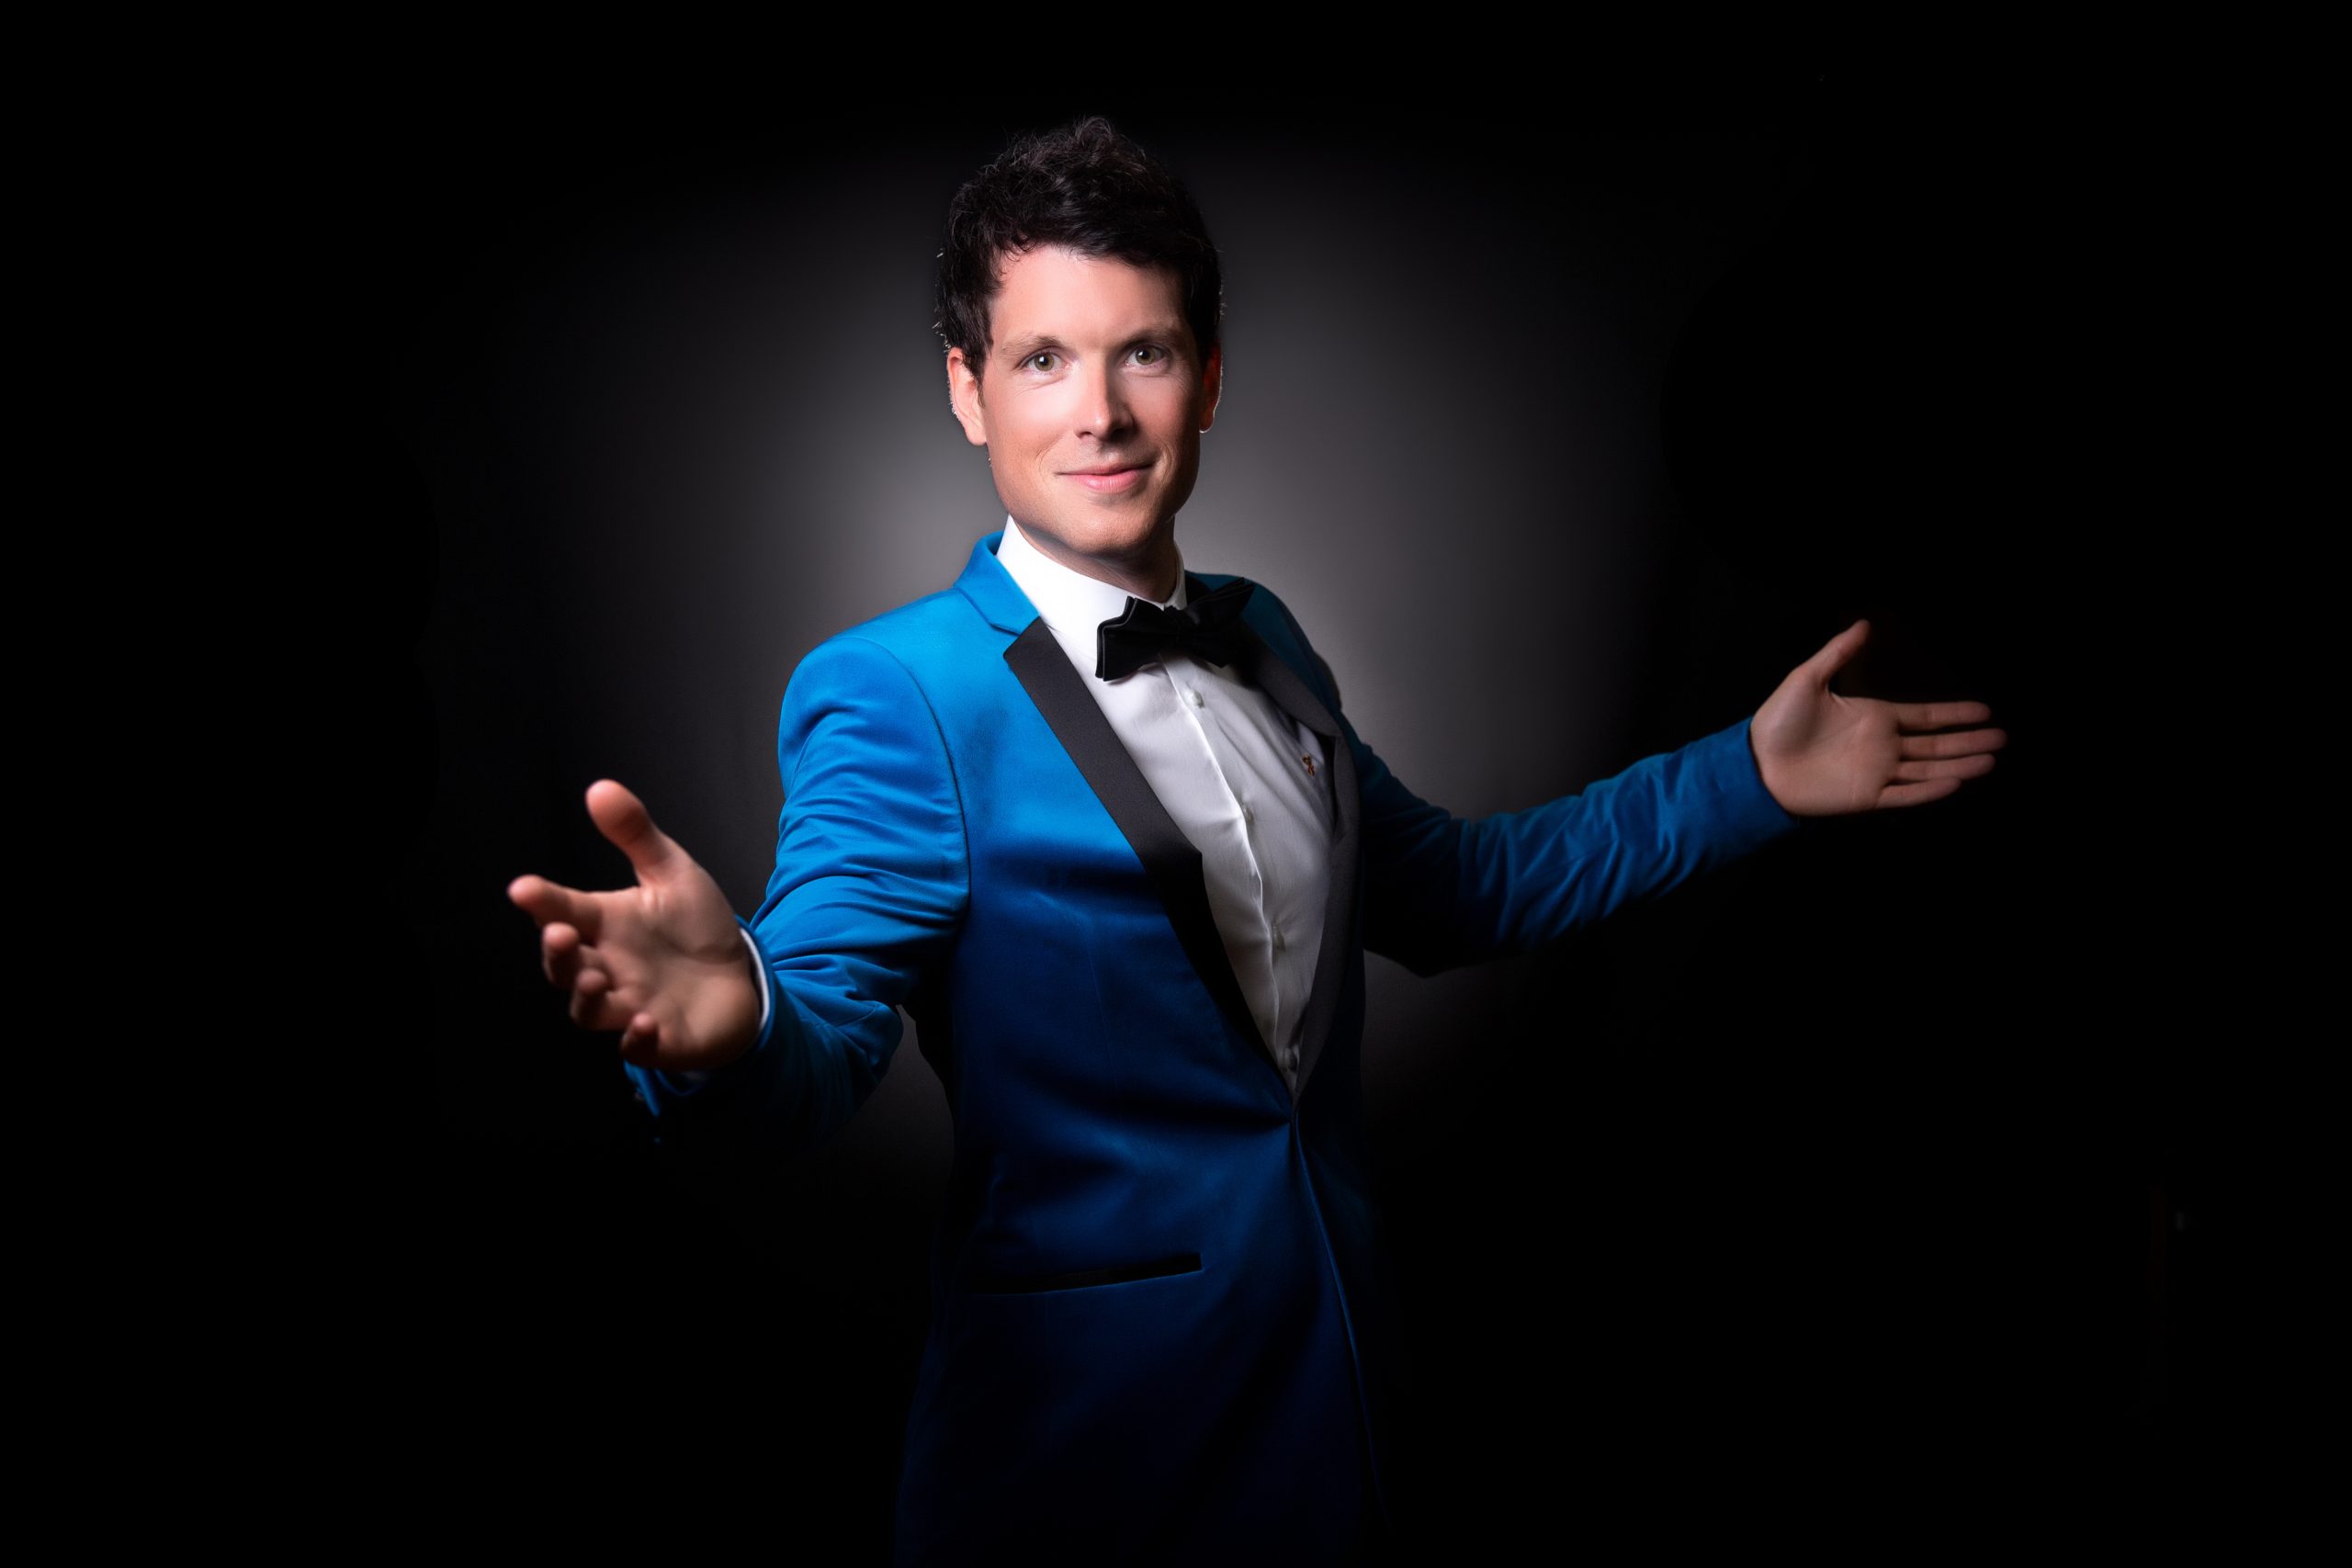 A singer - Mike Christi - in a spotlight wearing a blue tuxedo and black bow tie. His arms are outstretched.